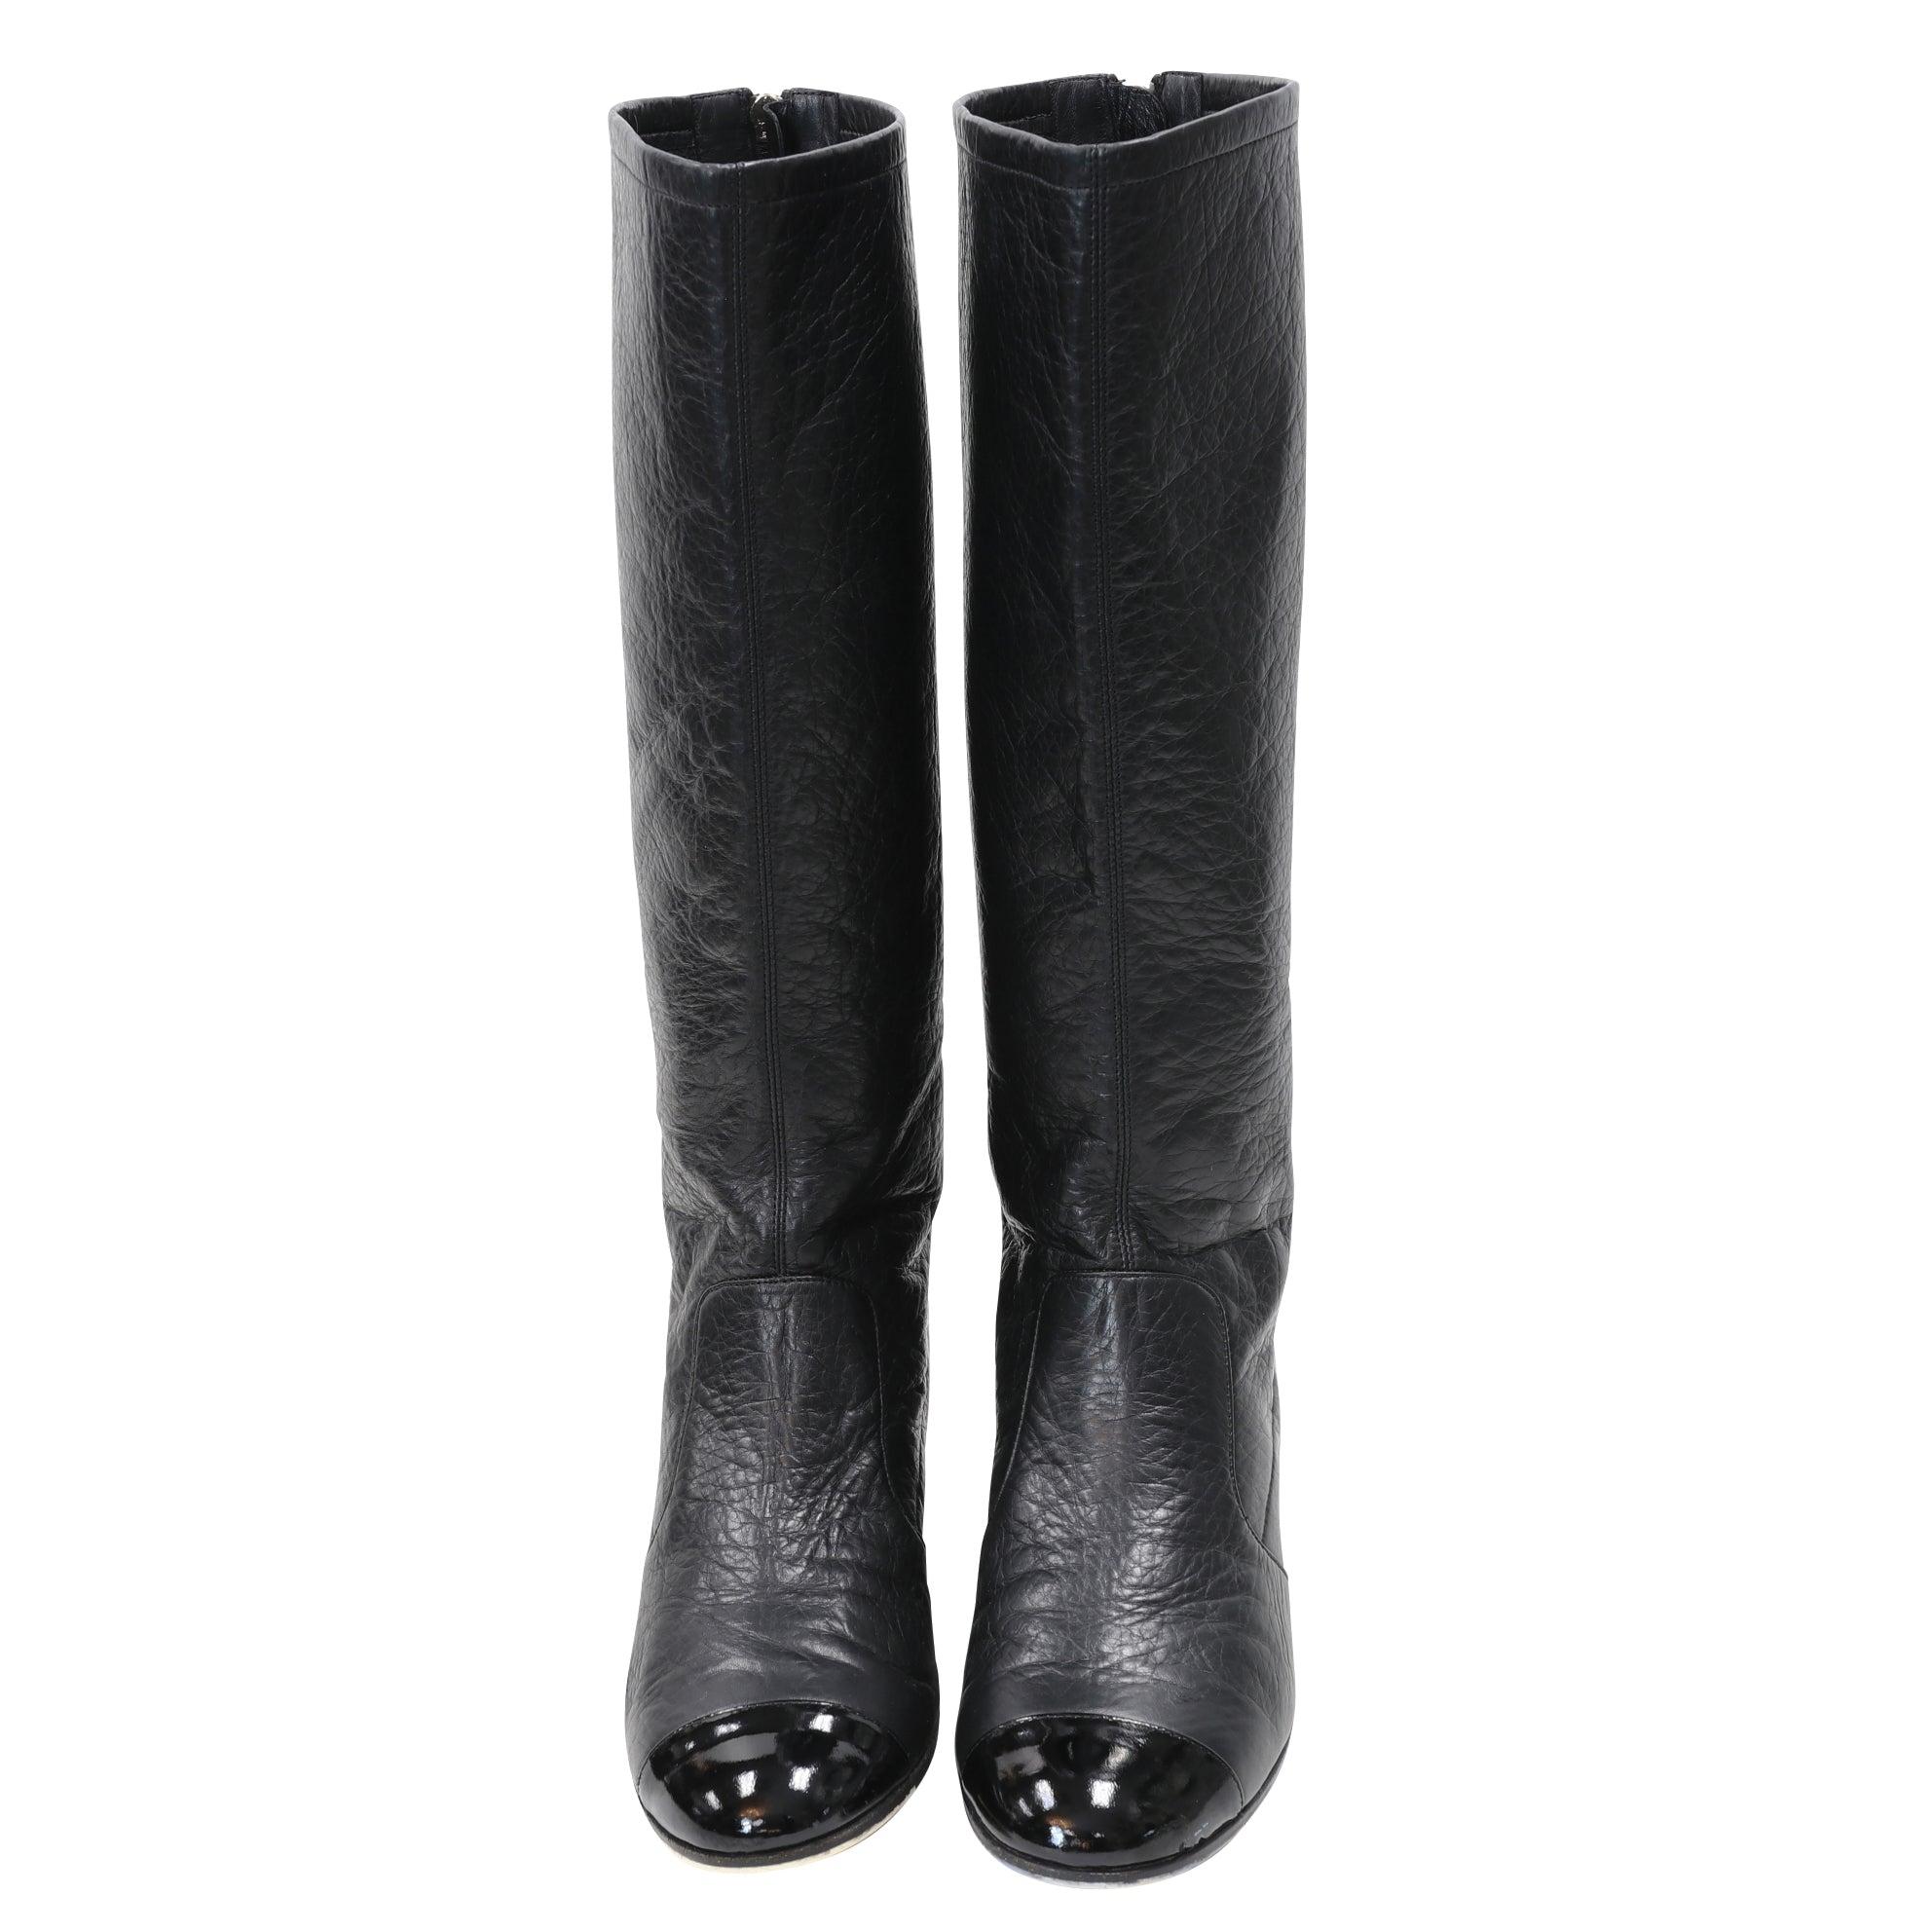 These Classic Chanel boots are a timeless piece. Made from calfskin leather, these boots feature a cap toe black gloss tone with a modern detail and a block heel. Leather lined uppers make for a comfortable fit. These boots are completely attention